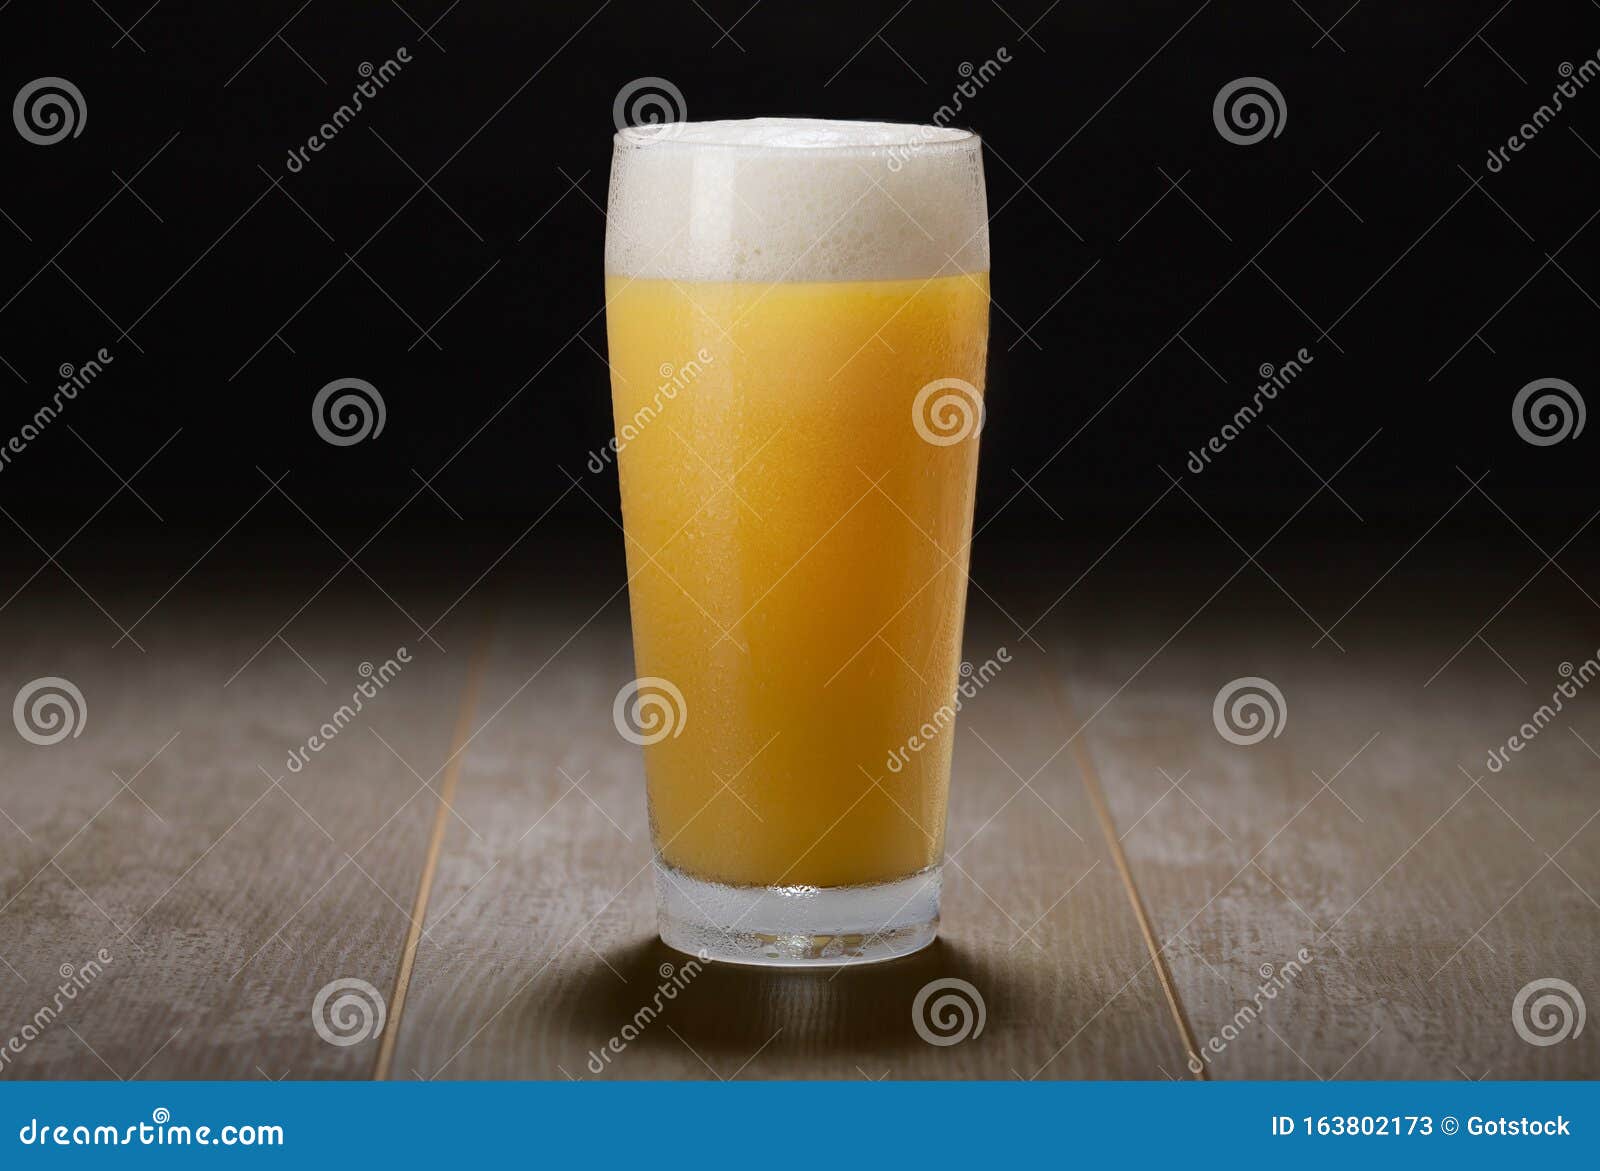 a glass of india pale ale, hazy unfiltered juicy draft beer on wooden surface and black background